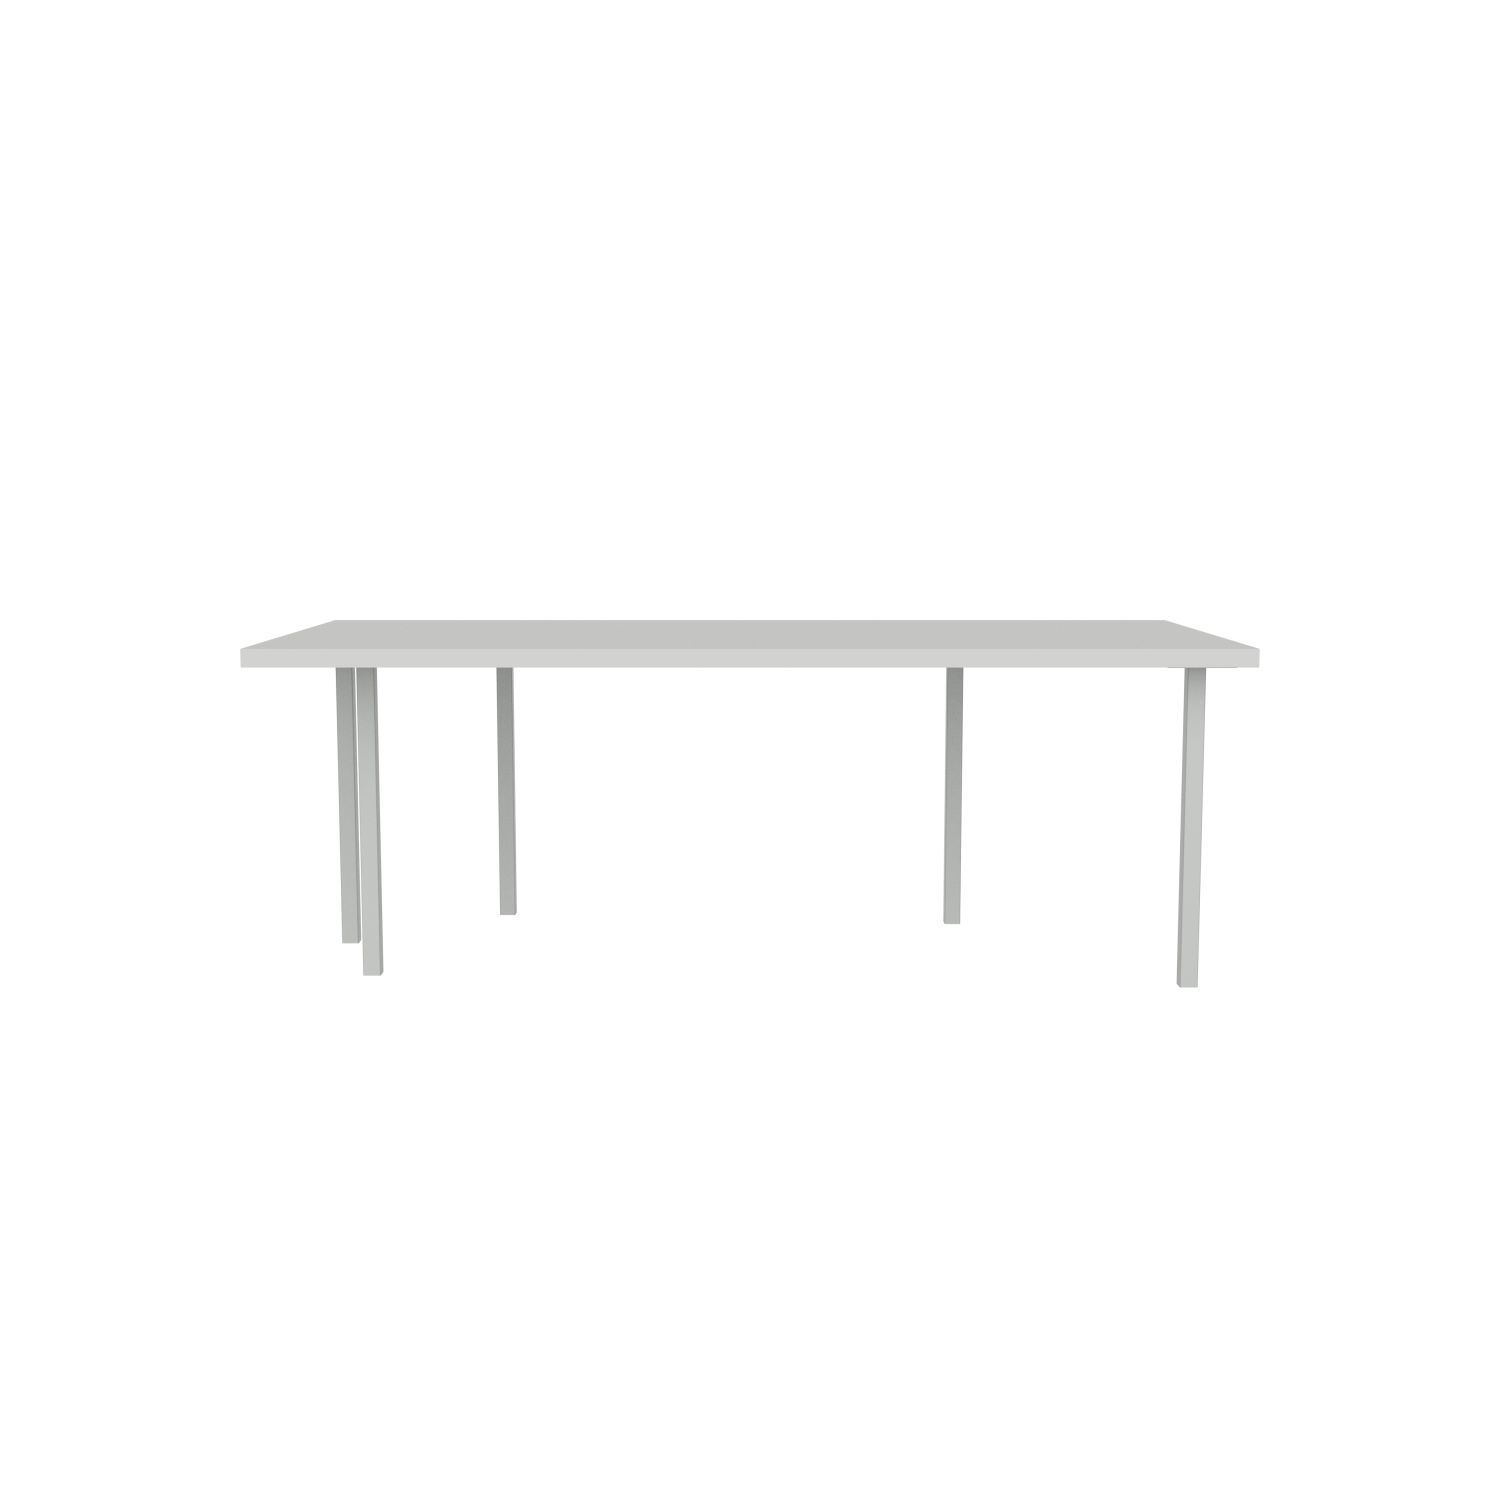 lensvelt bbrand table five fixed heigt 103x218 hpl boring grey 50 mm price level 1 light grey ral7035